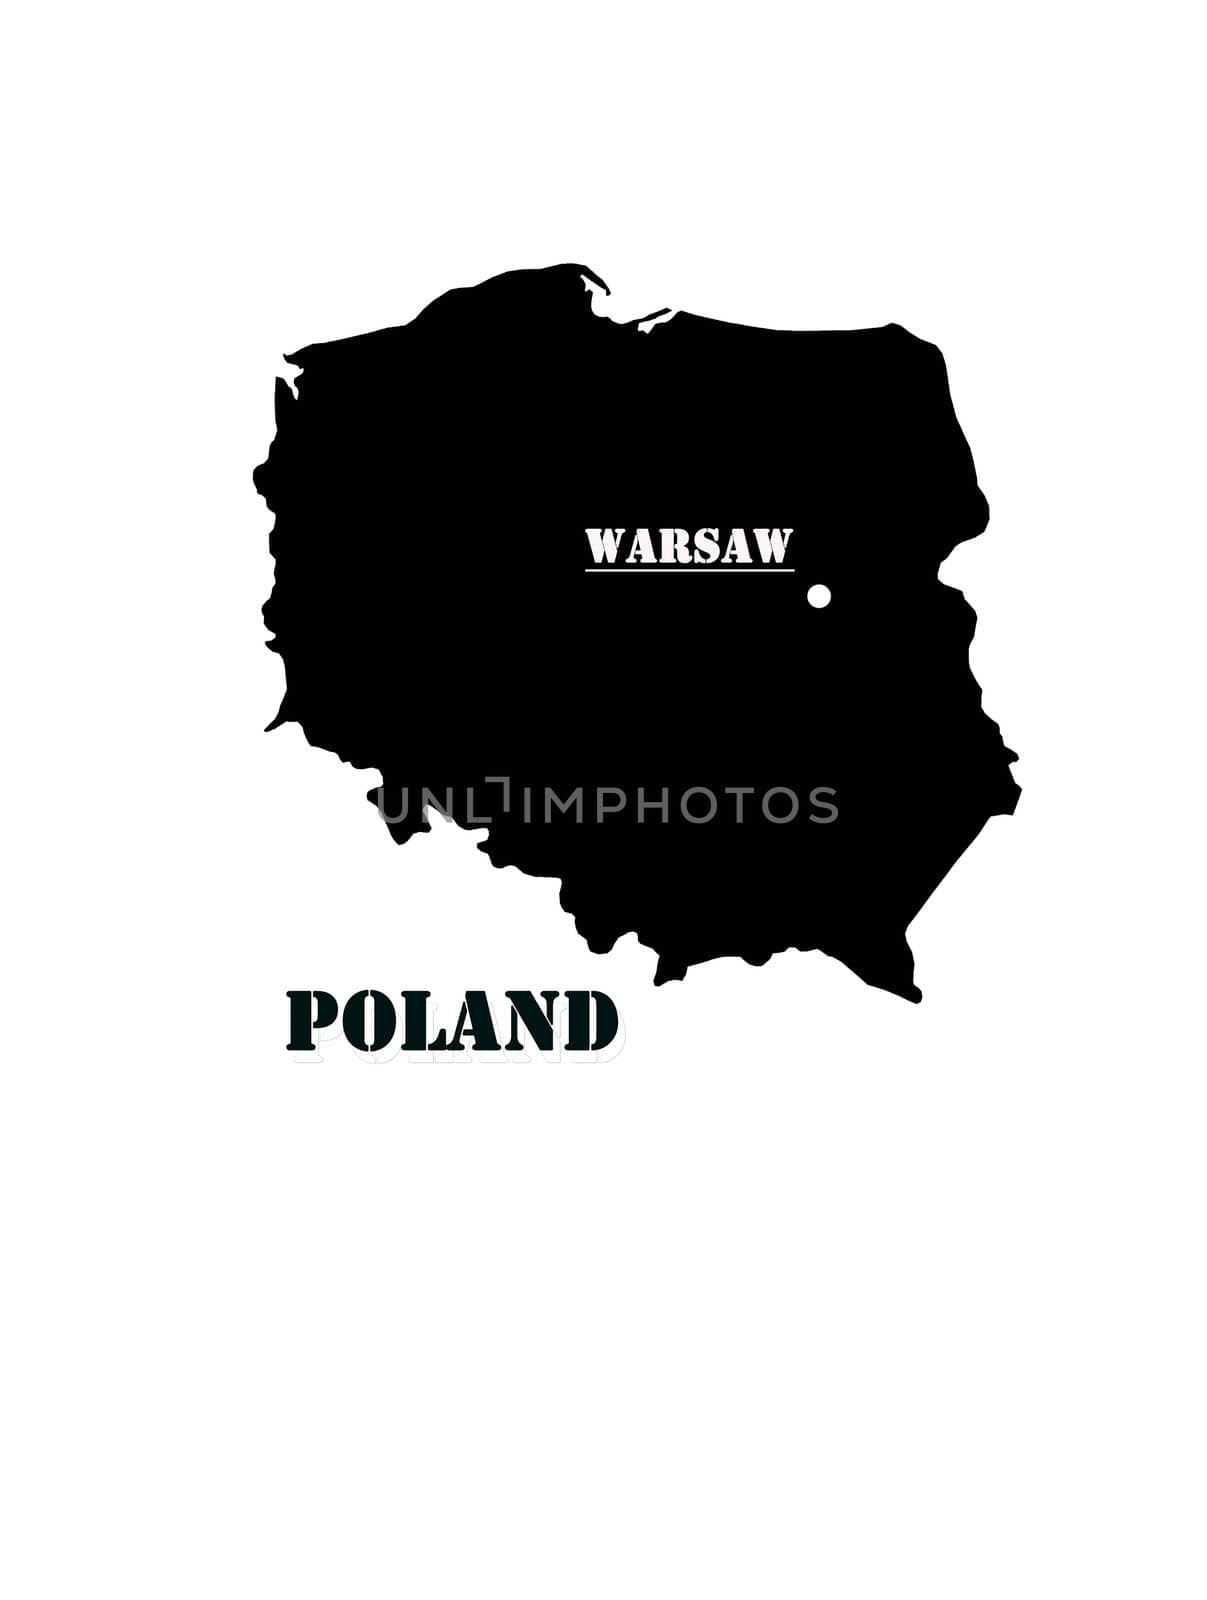 The black and white map of Poland by alexmak